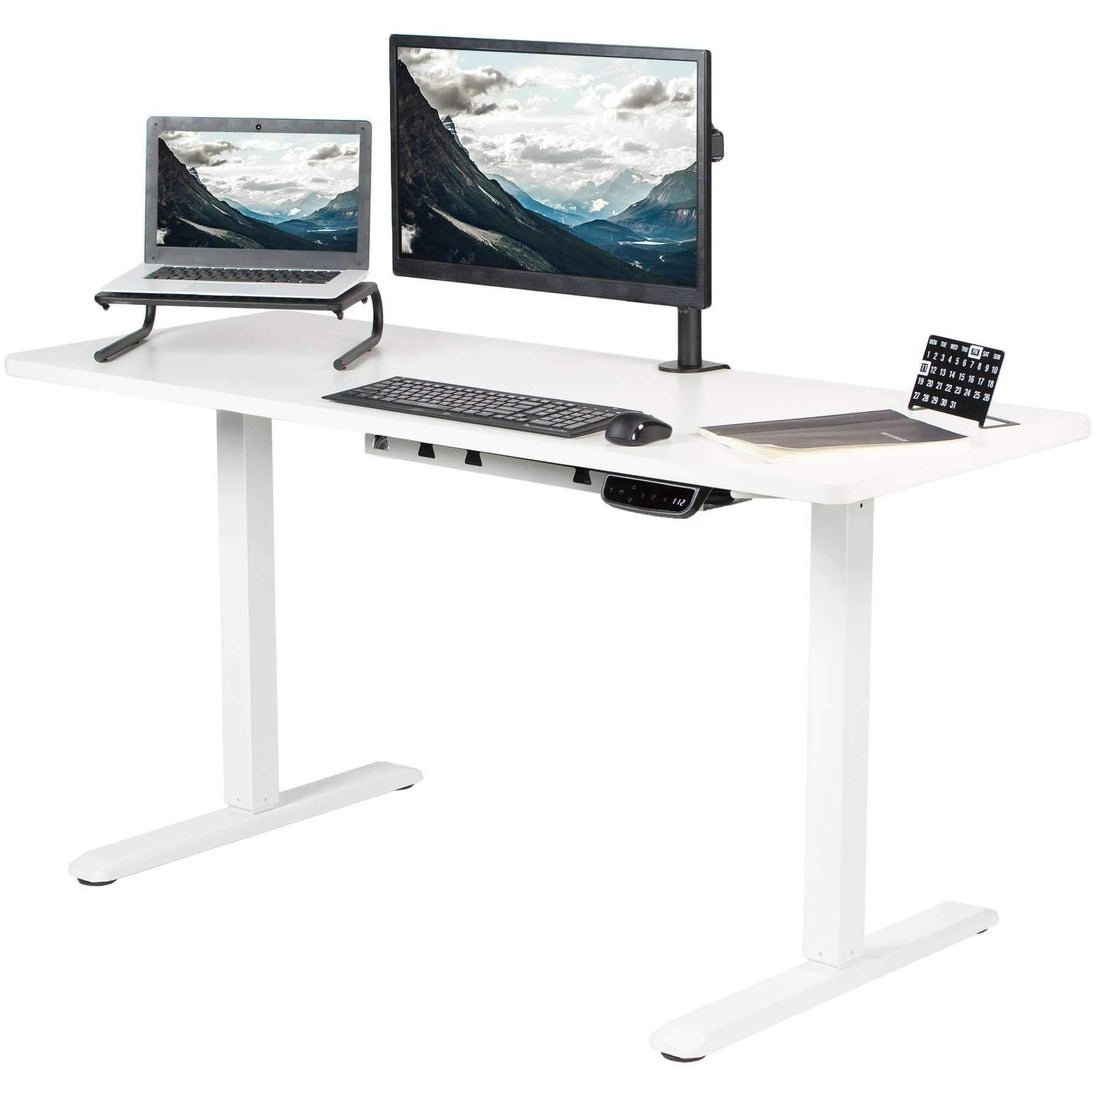 SHW's Electric Height Adjustable Standing Desk is 18% off